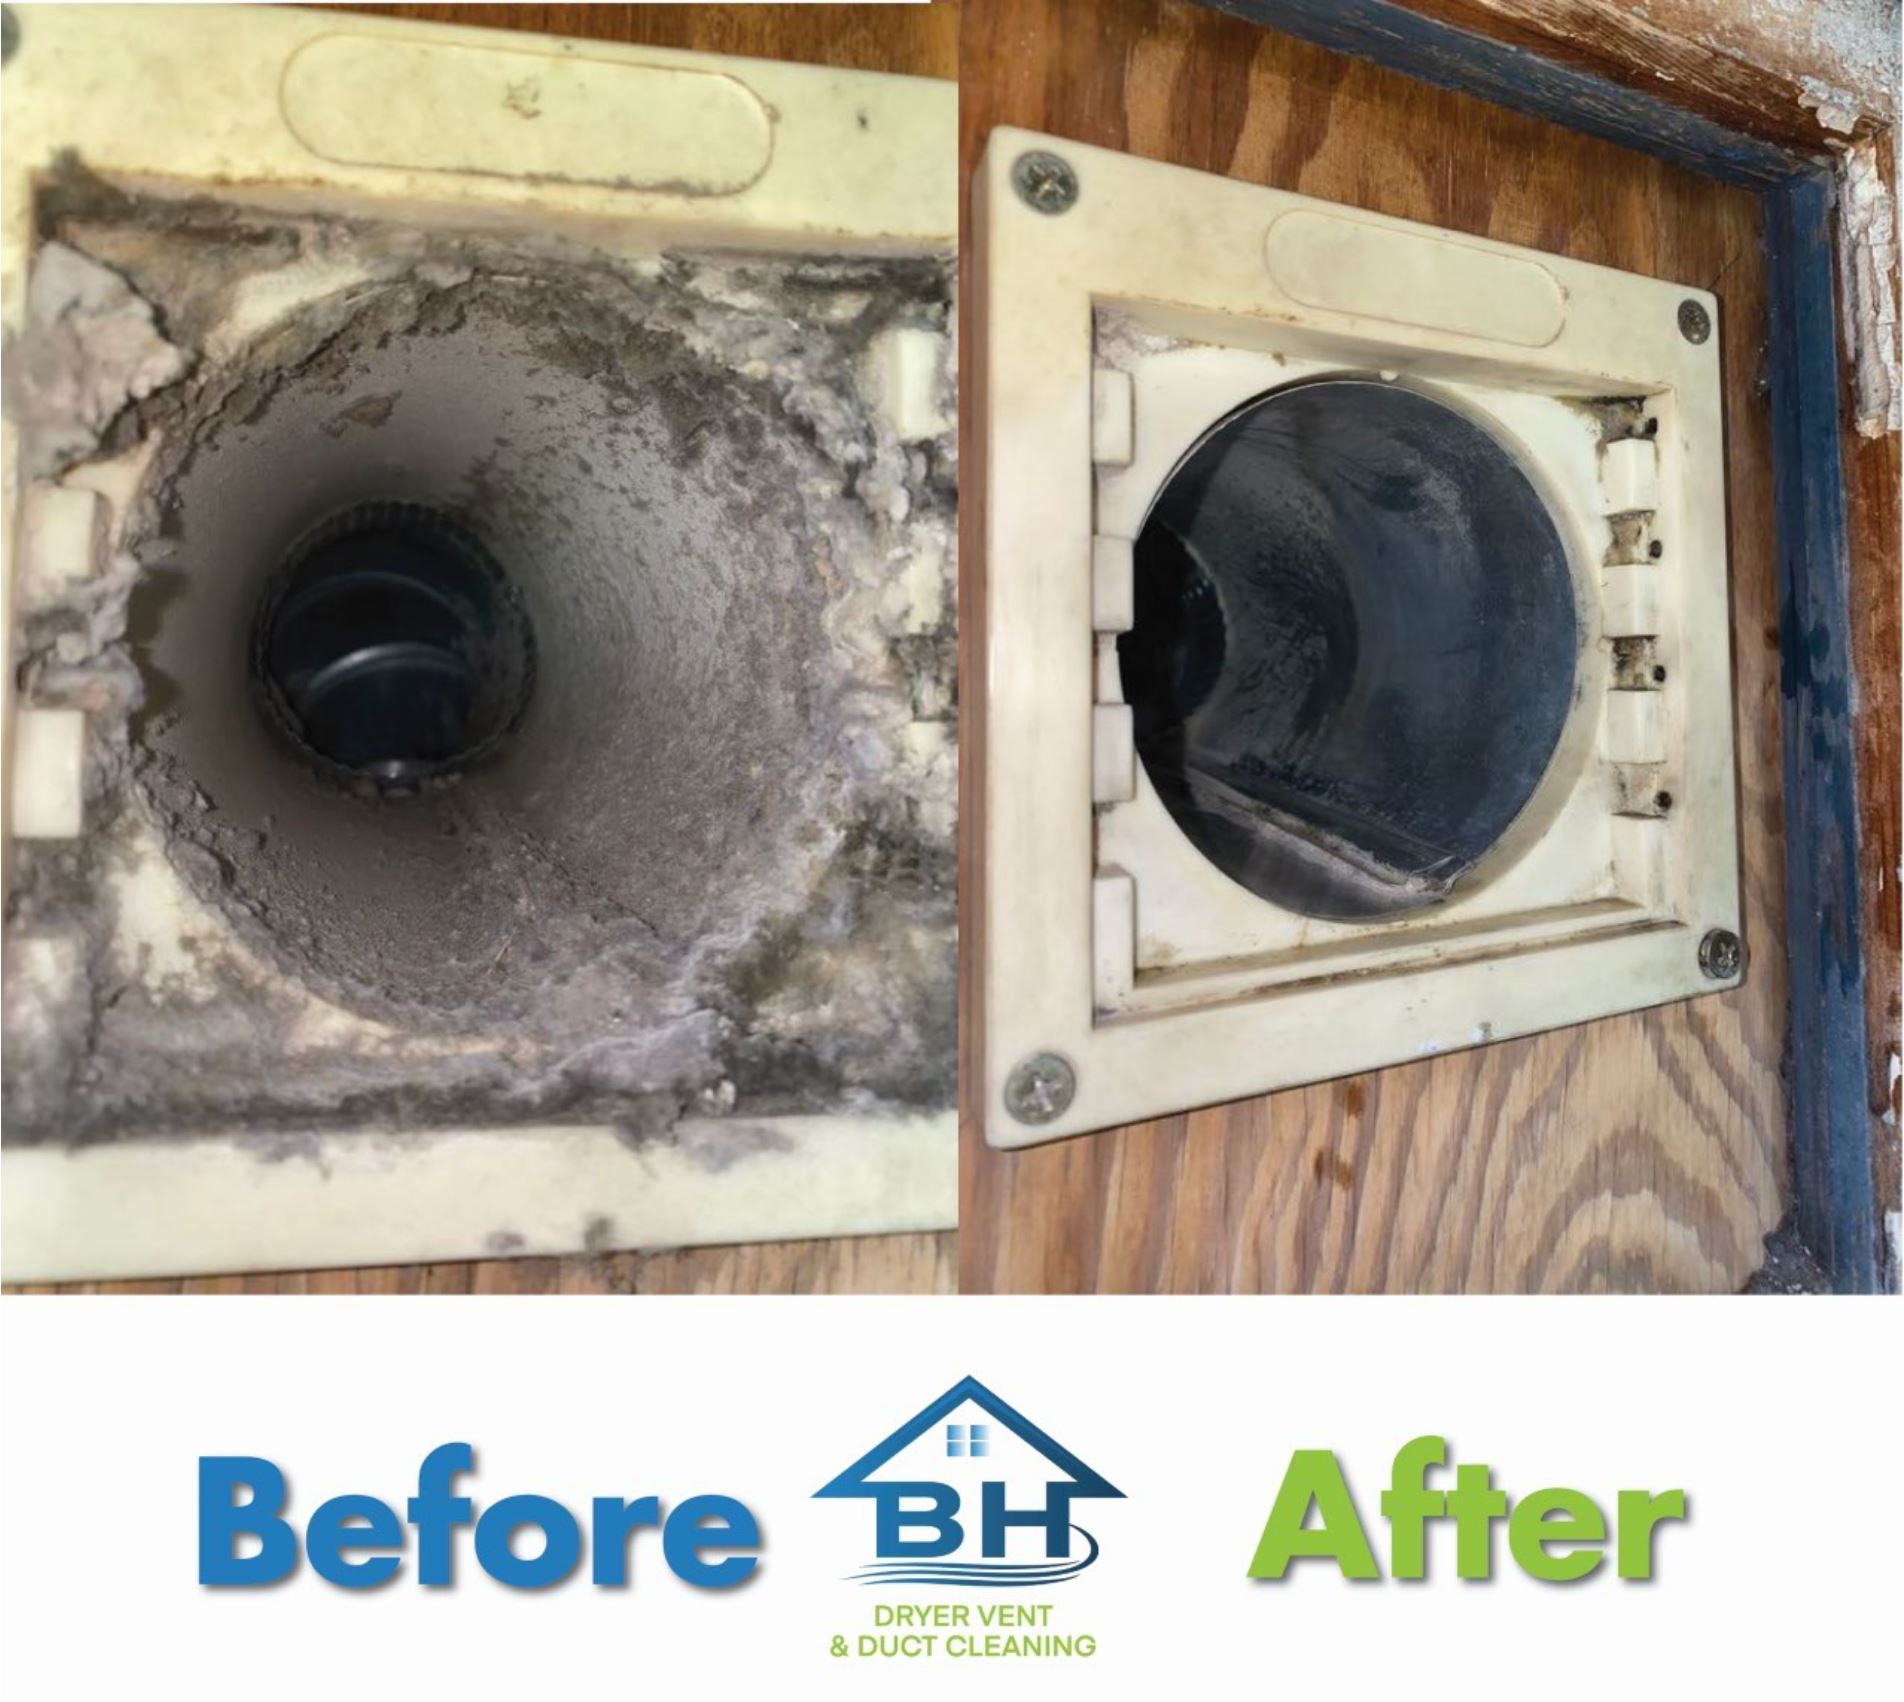 Dryer Vent and Duct Cleaning Services in Anne Arundel County